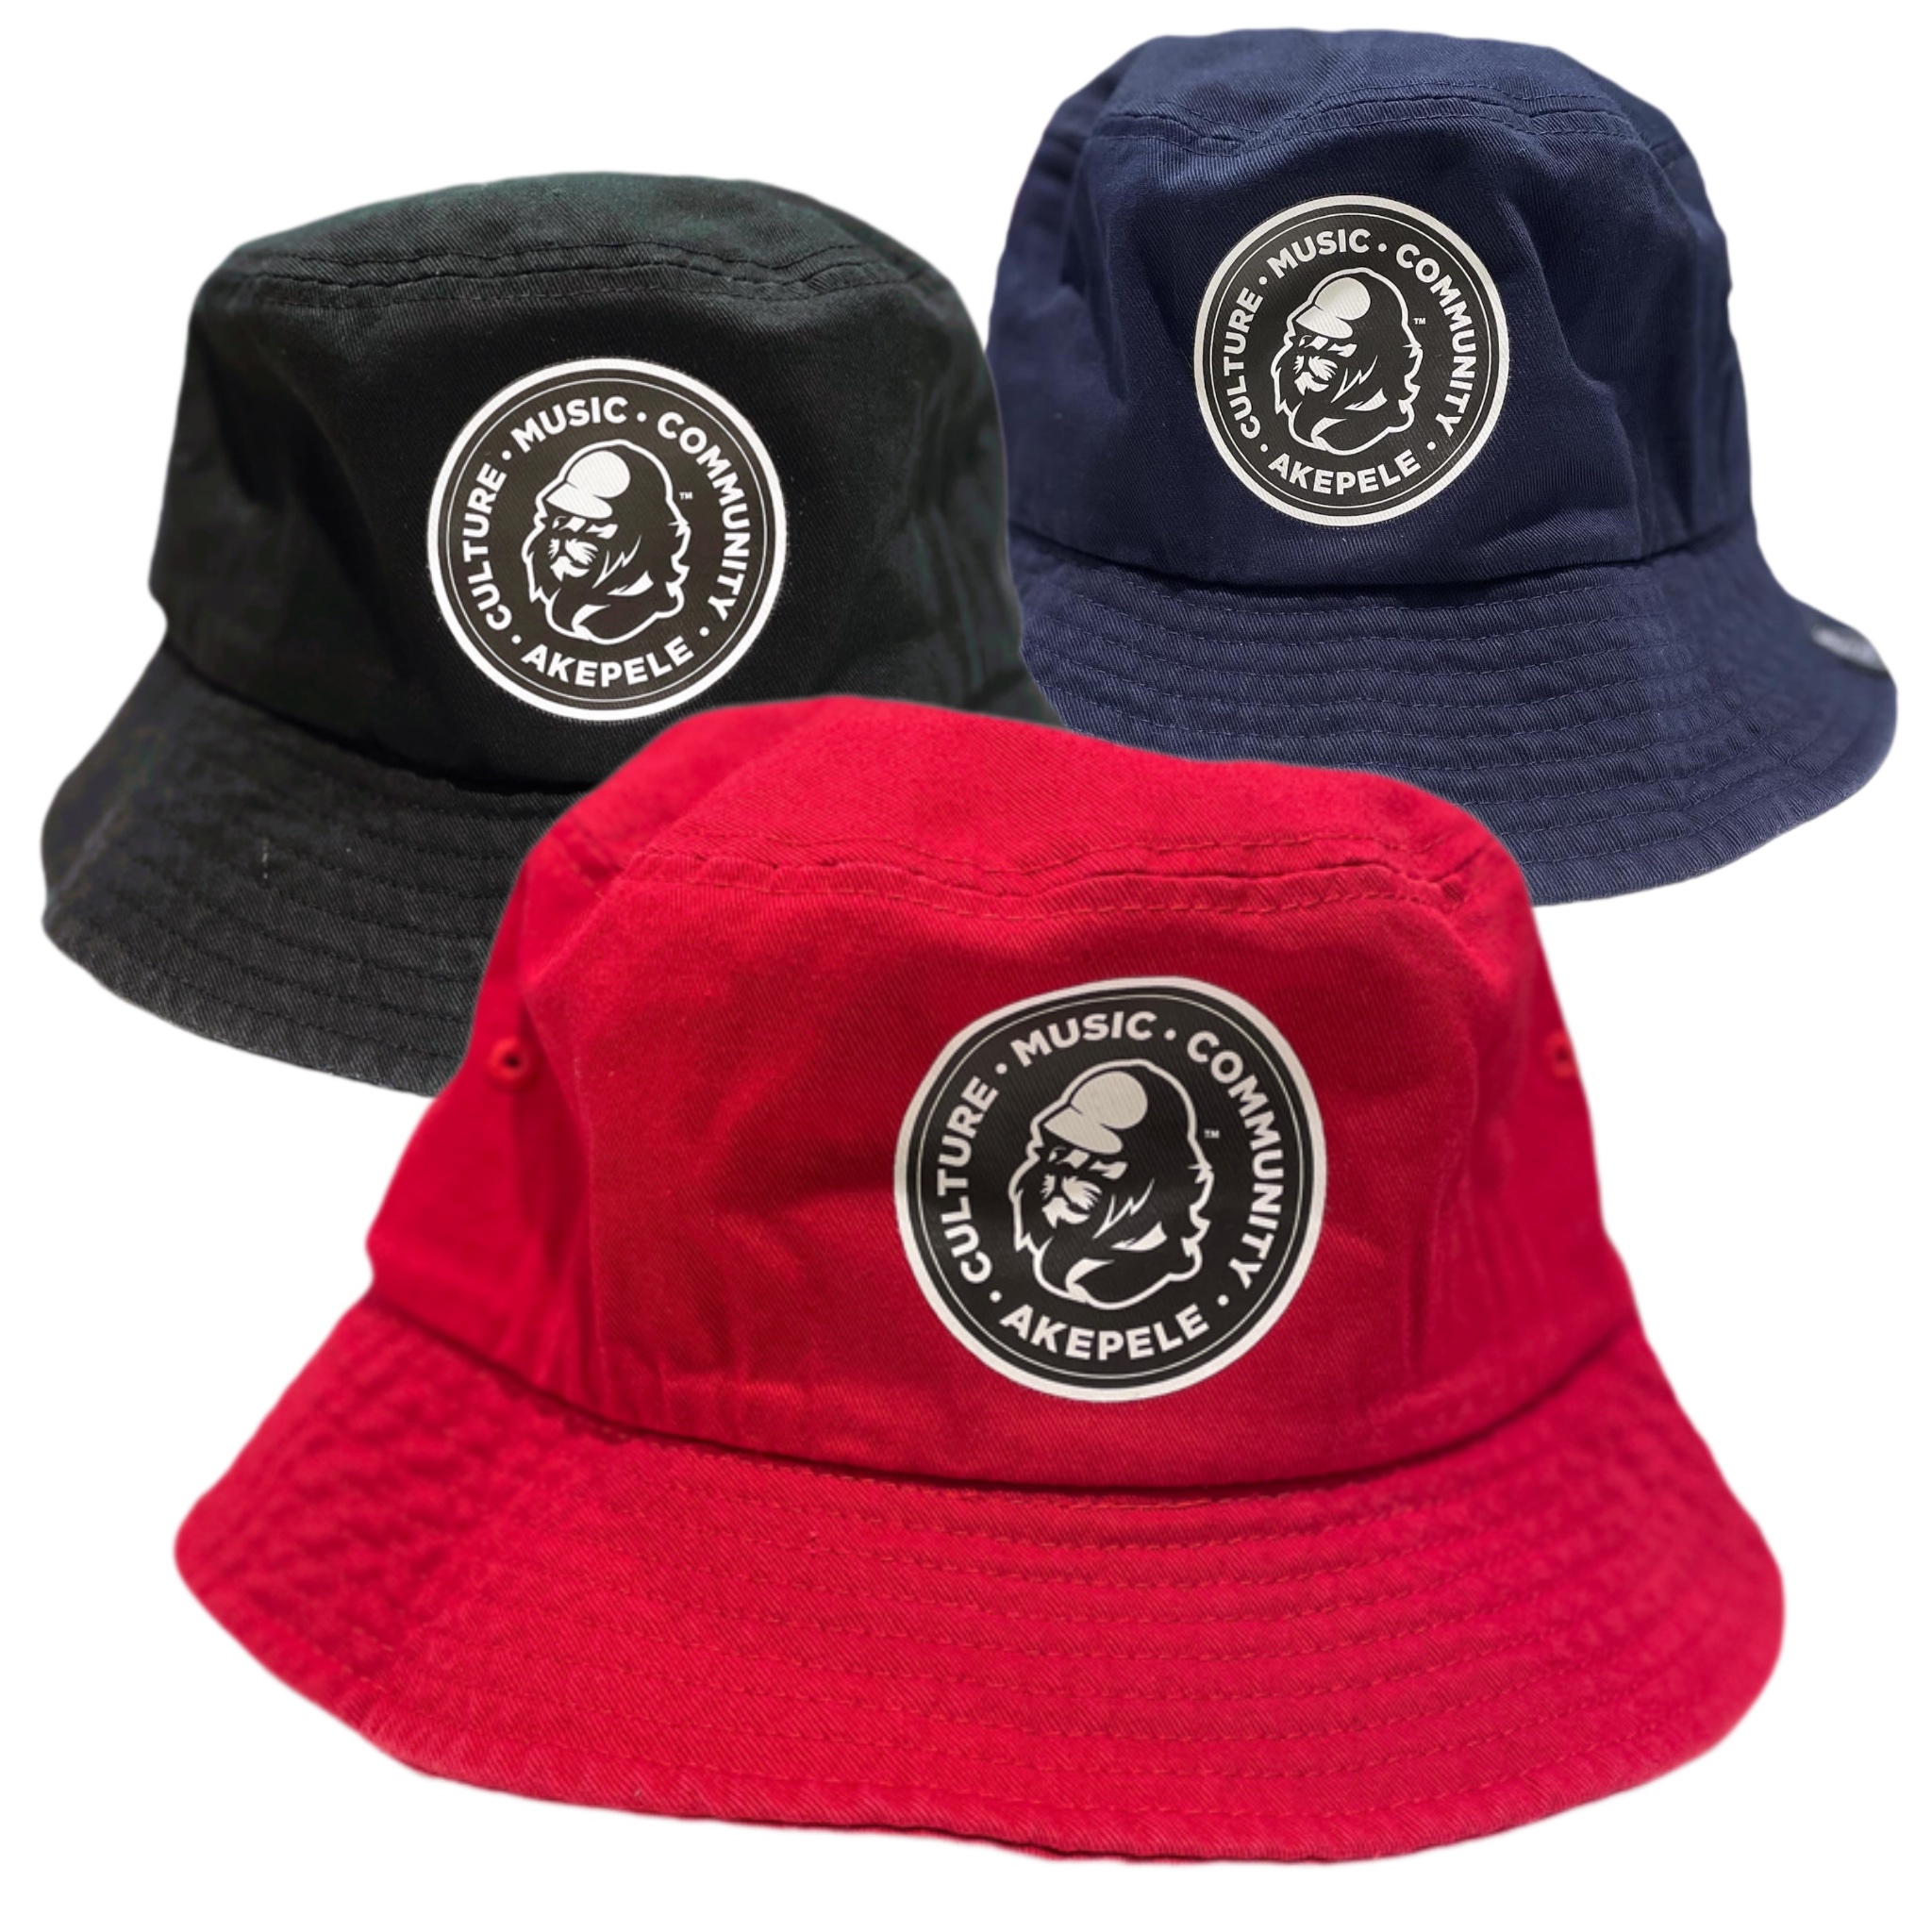 Akepele Chino Bucket Hats - Group stacked